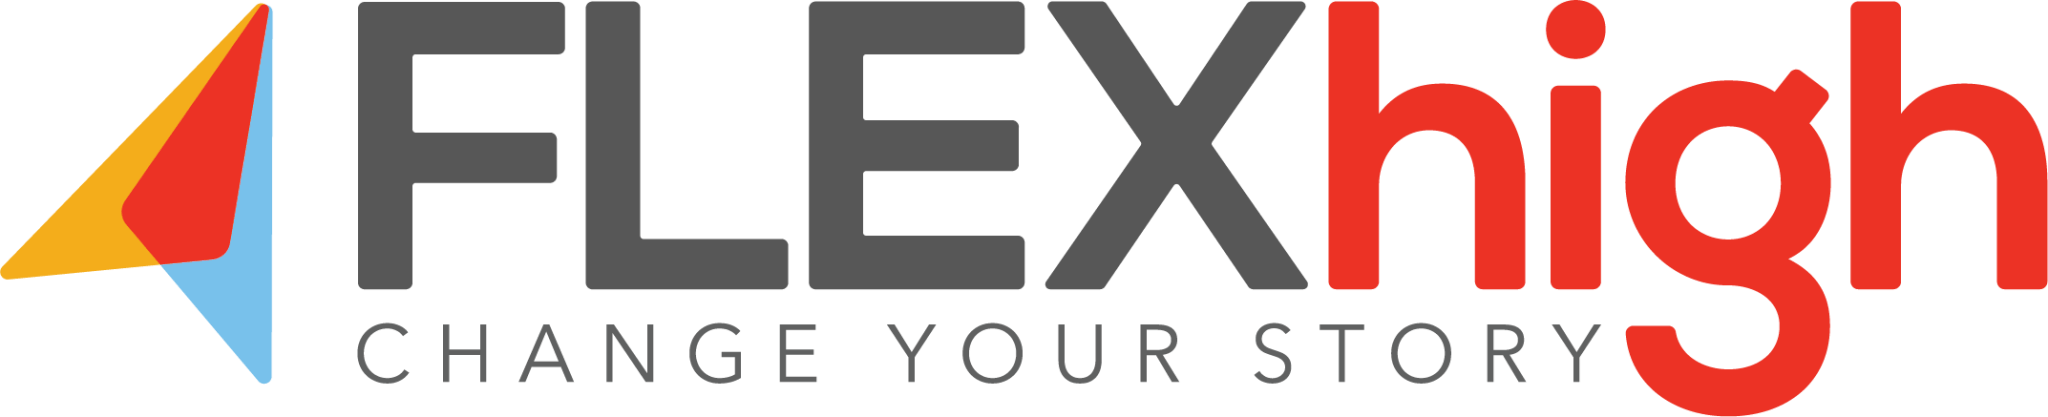 FLEX High Ohio - Personalized Learning, Career Training and Life